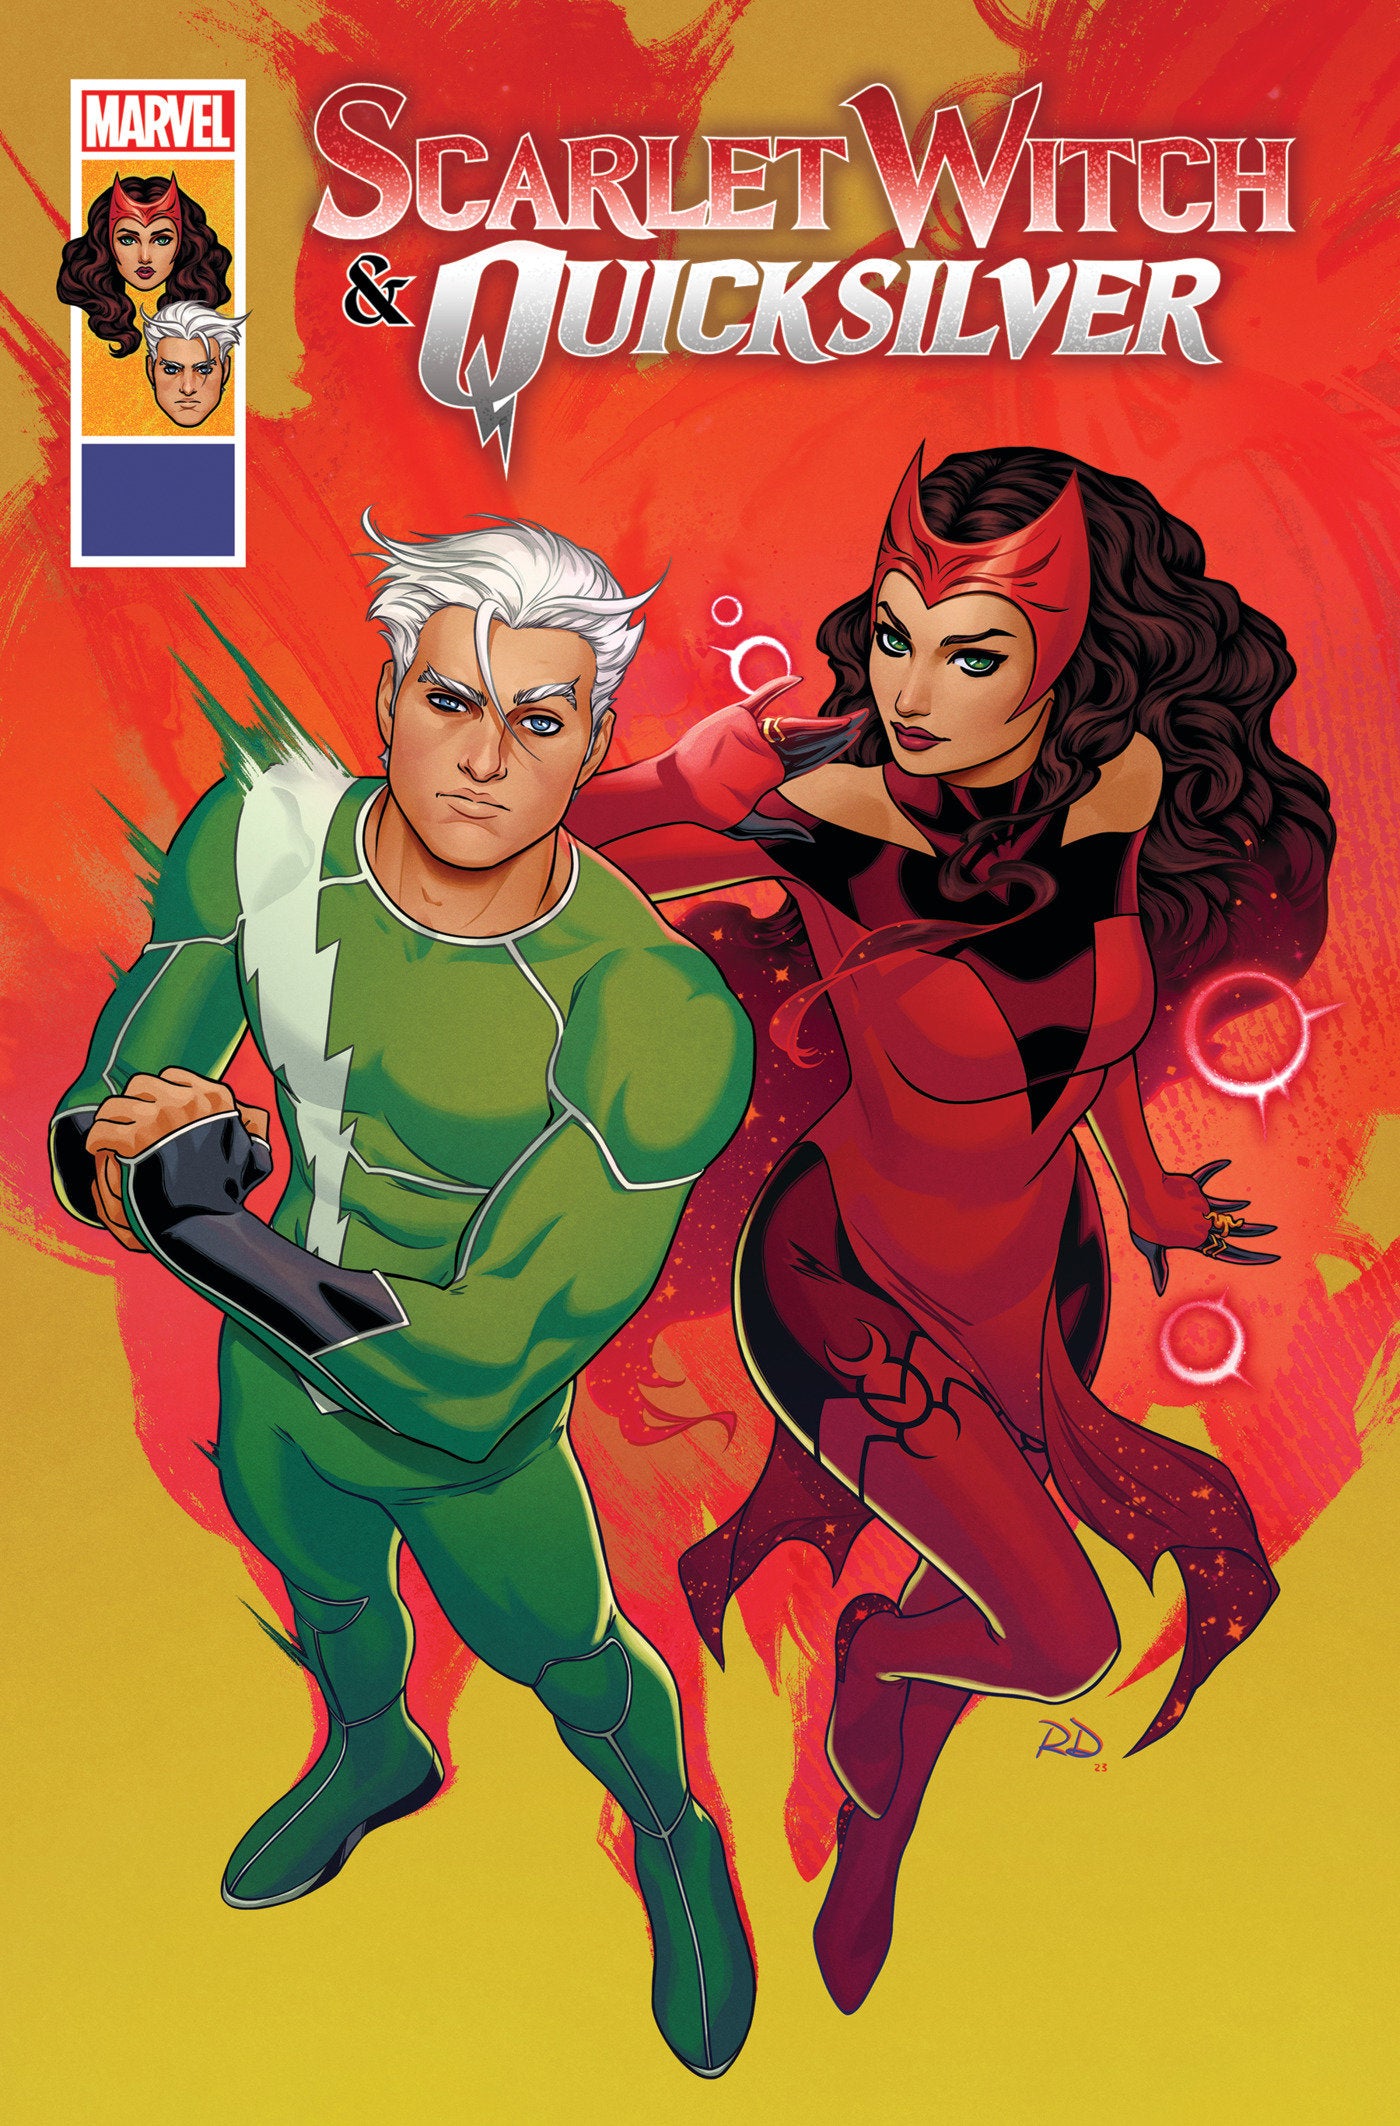 Scarlet Witch By Steve Orlando Volume. 3: Scarlet Witch & Quicksilver | BD Cosmos